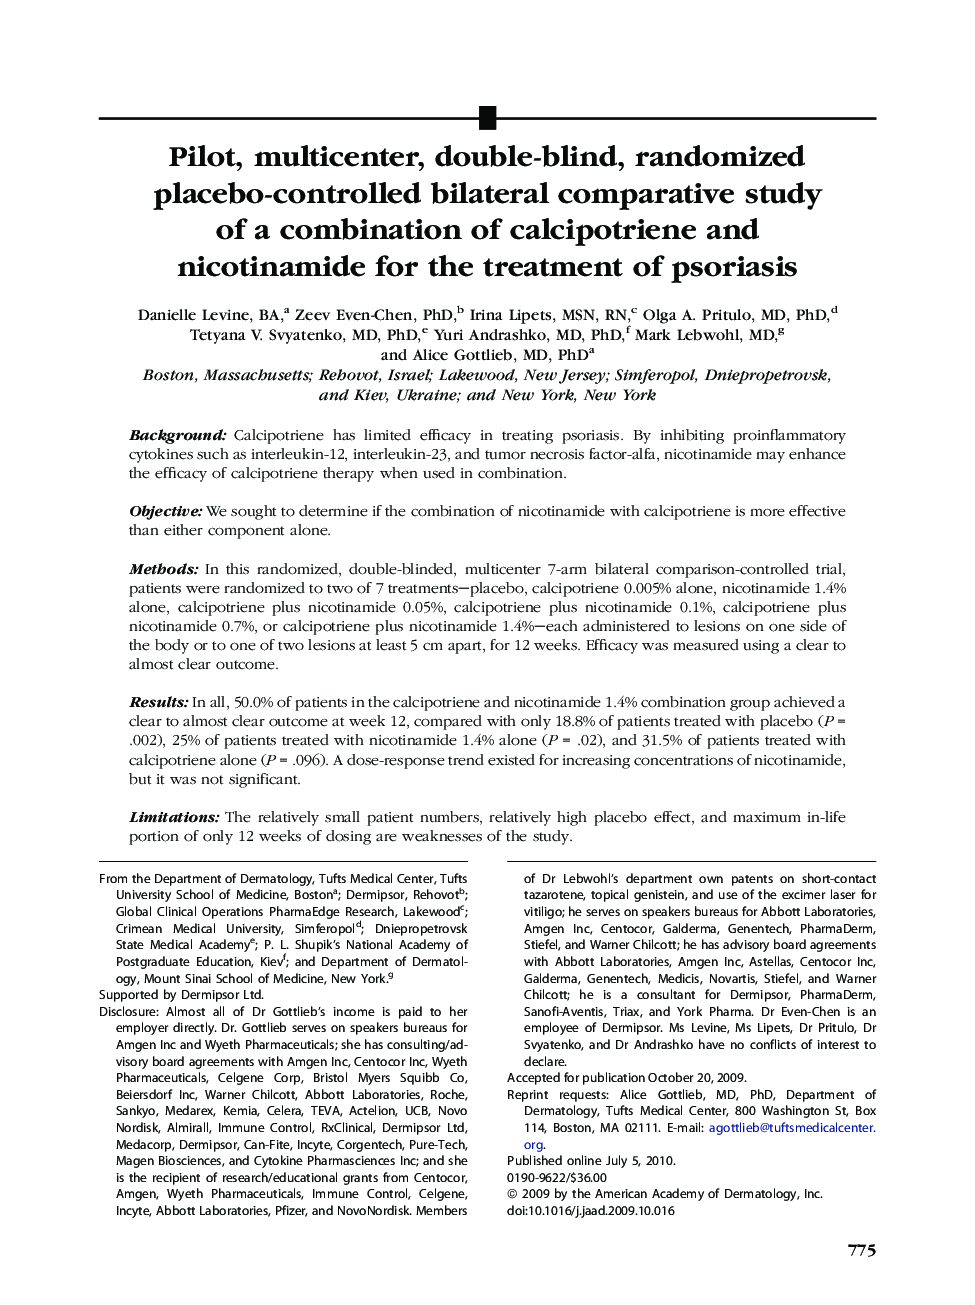 Pilot, multicenter, double-blind, randomized placebo-controlled bilateral comparative study of a combination of calcipotriene and nicotinamide for the treatment of psoriasis 